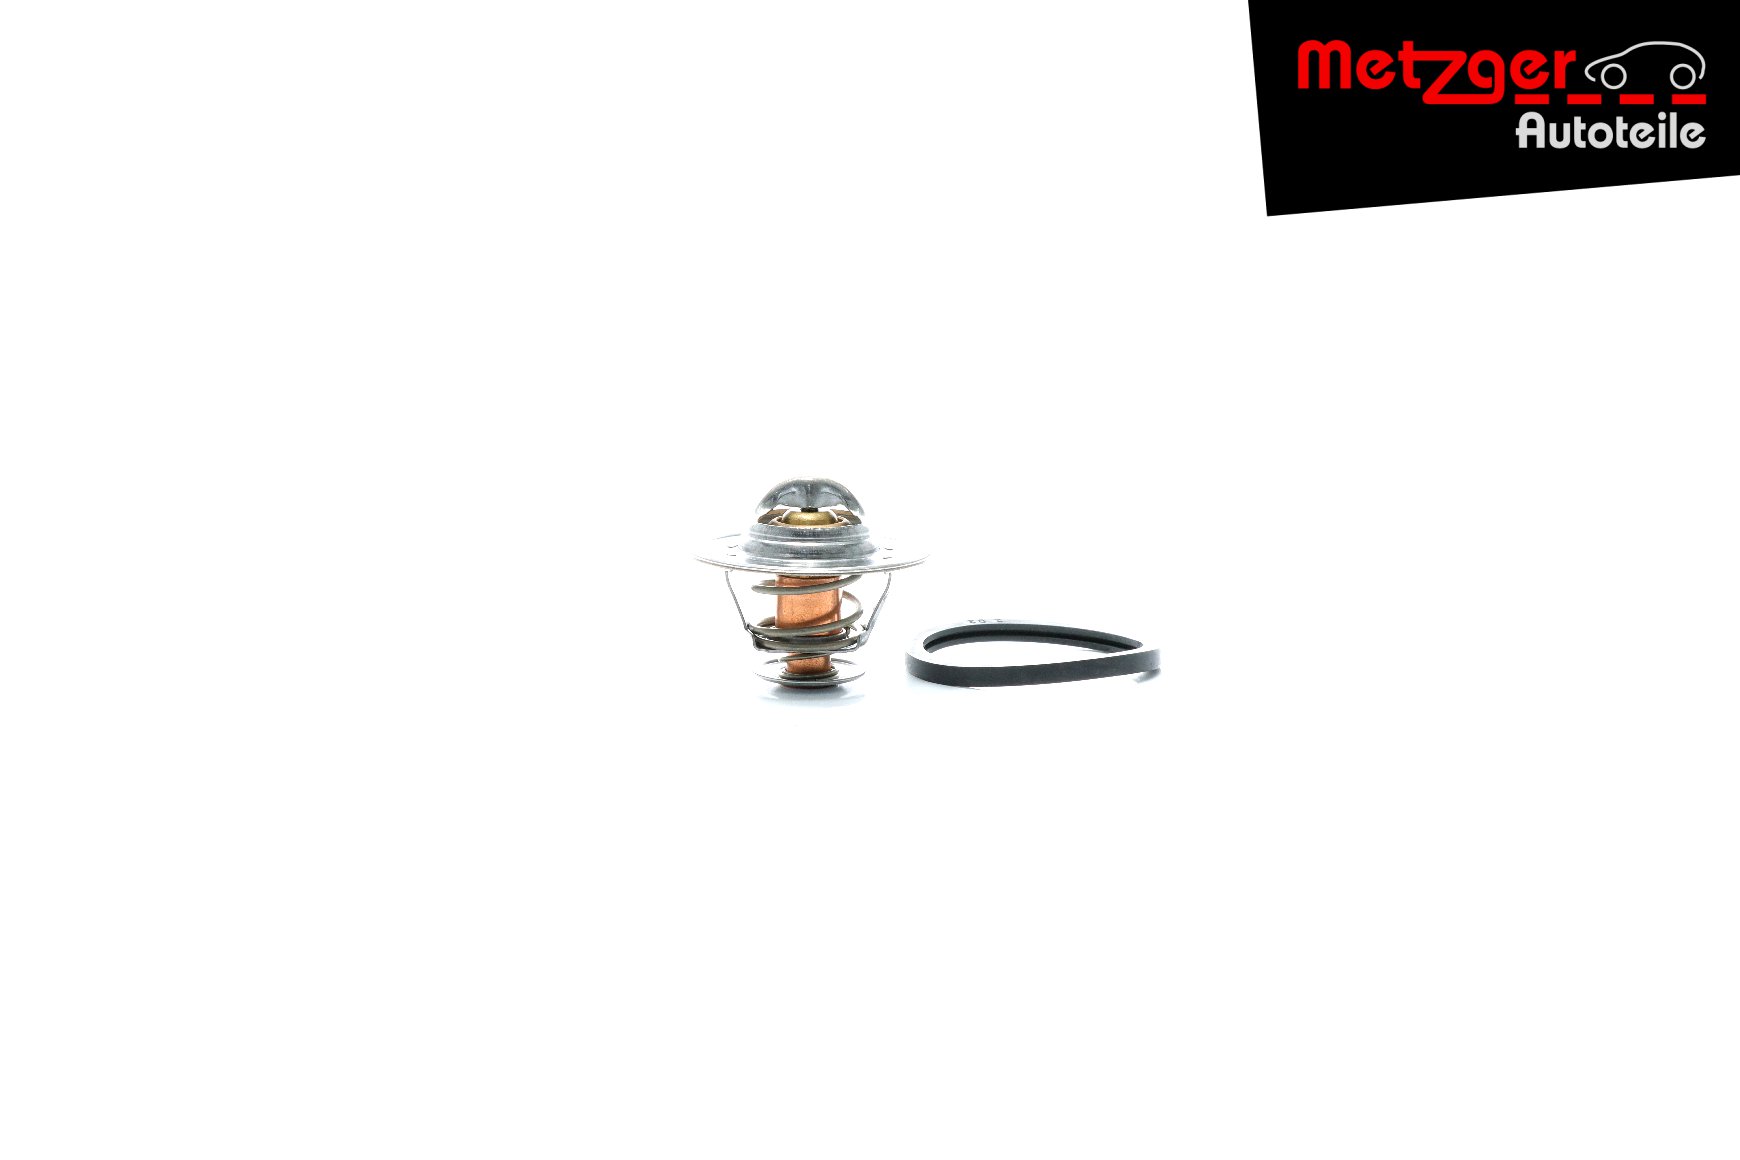 Iveco Engine thermostat METZGER 4006031 at a good price